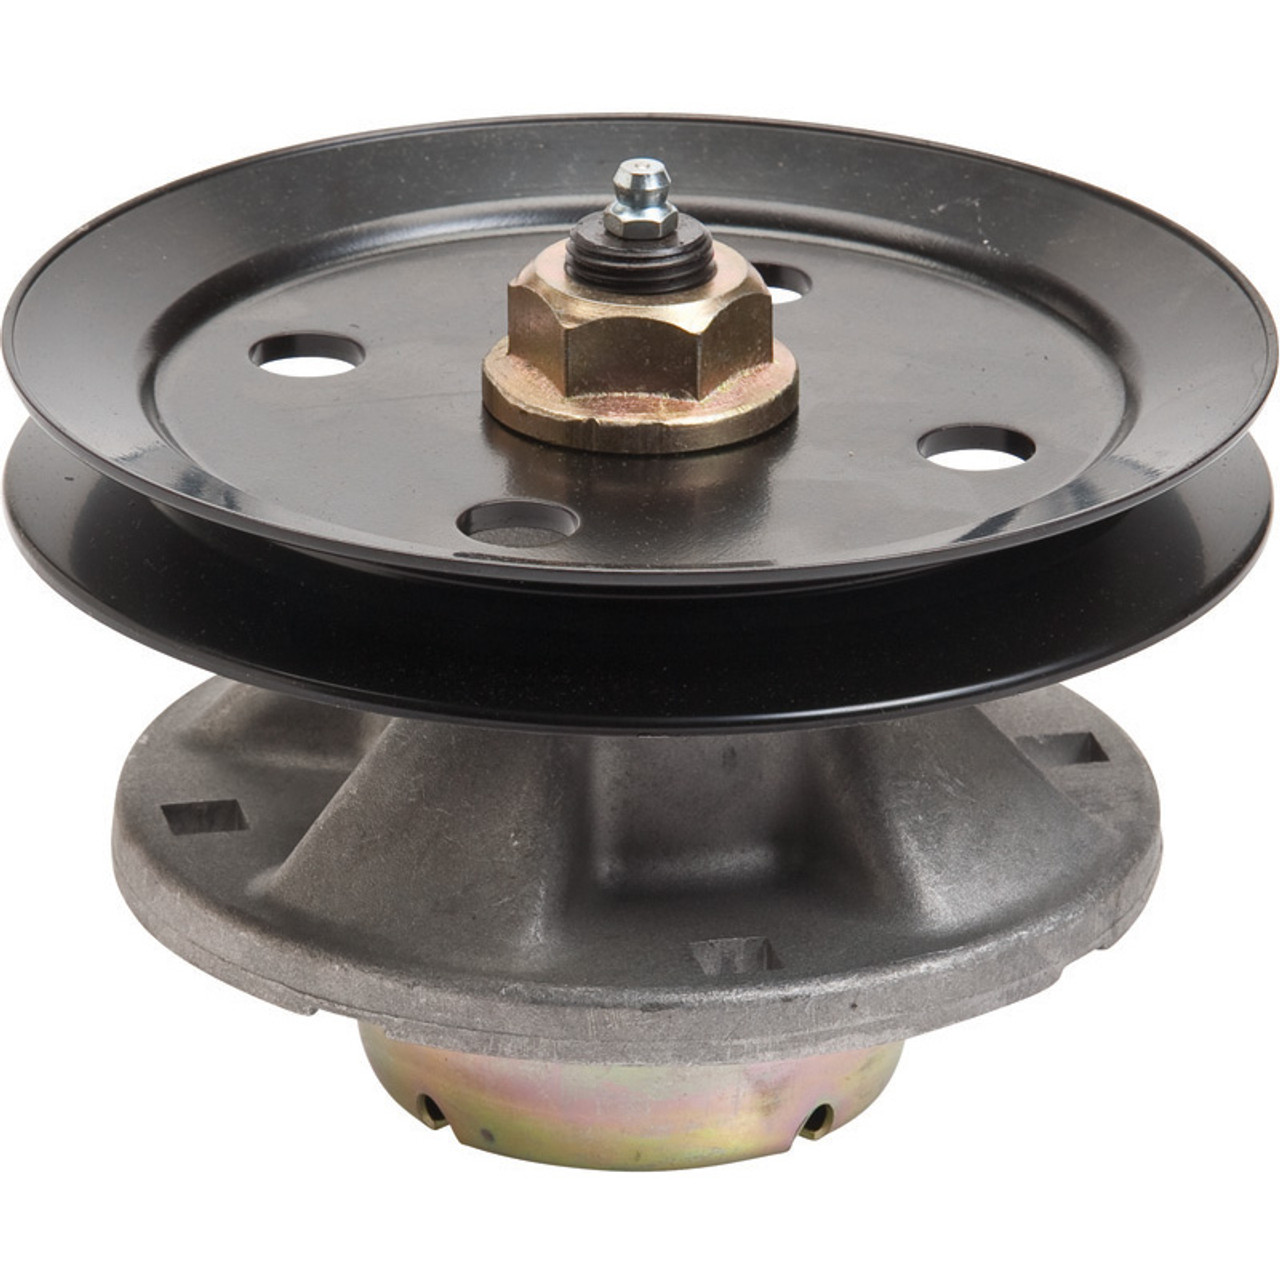 Oregon 82-333 John Deere Spindle Assembly with Pulley for AM121342